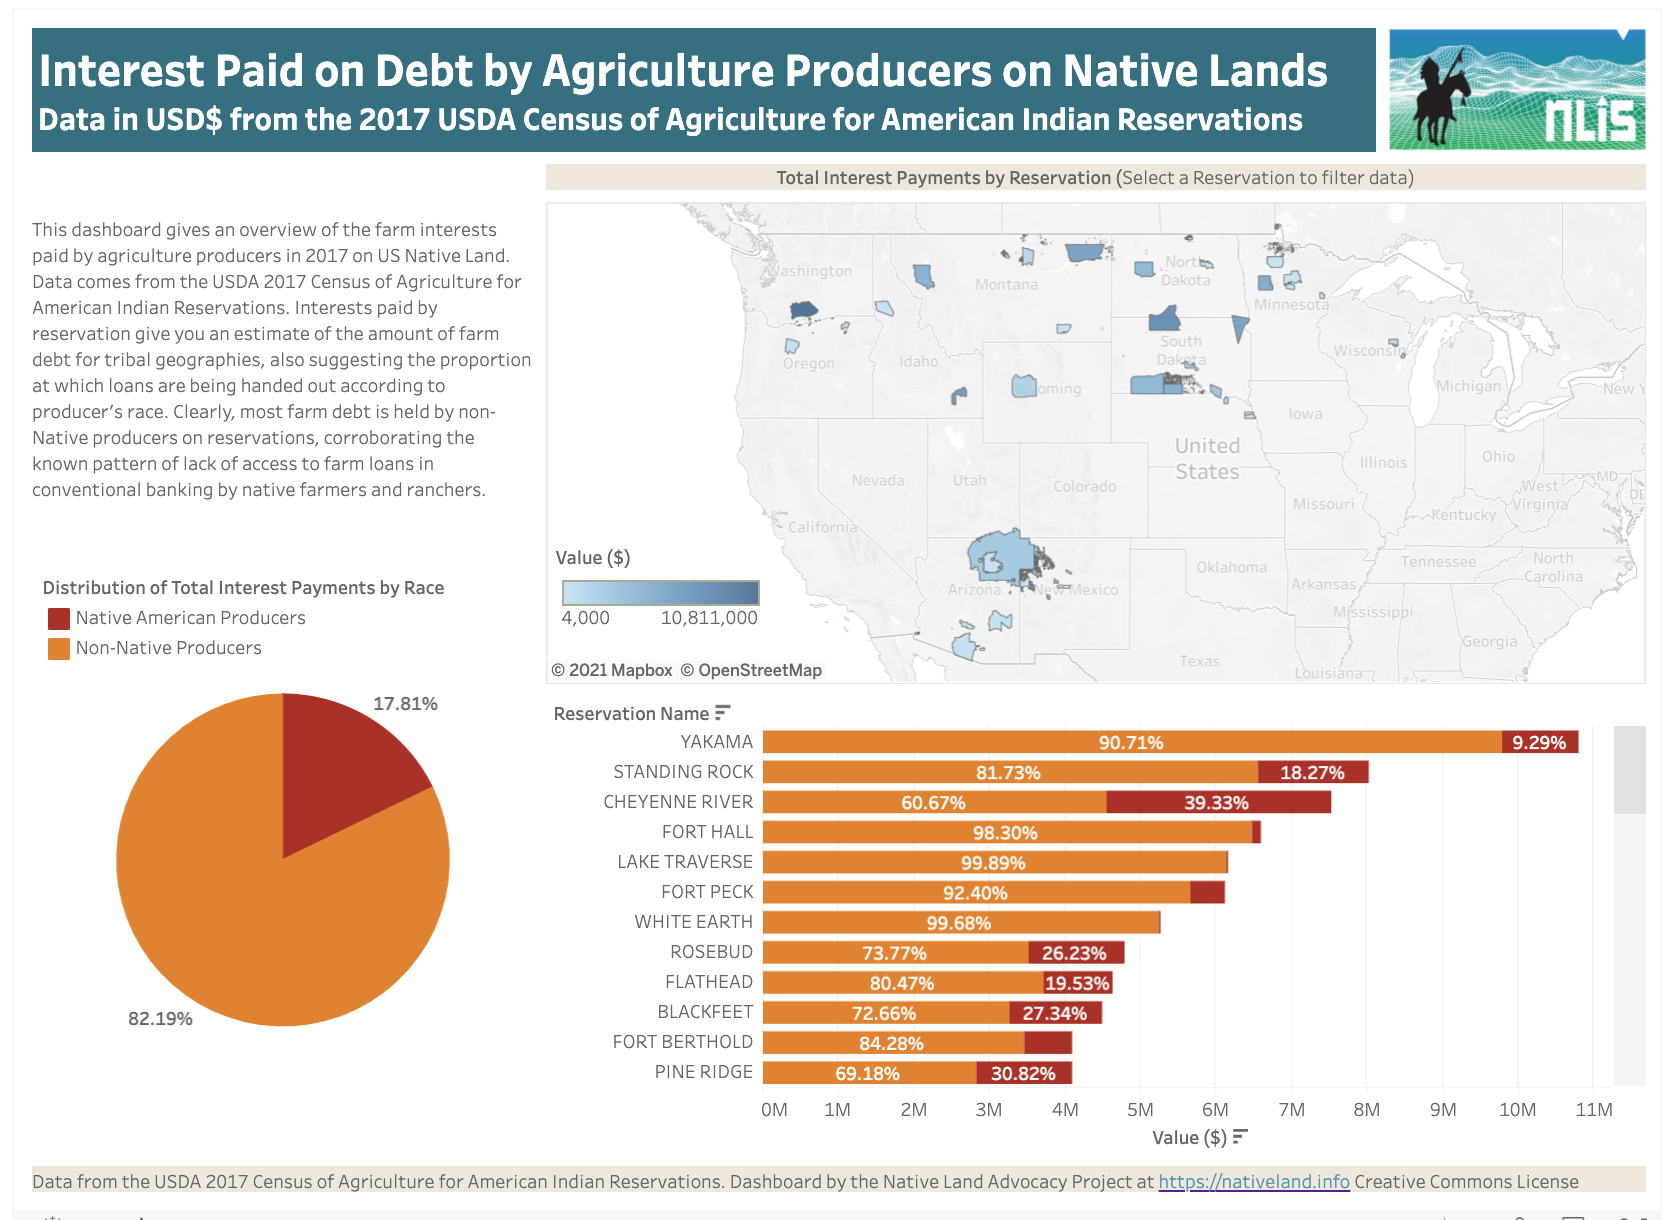 Interest Paid on Debt by Race for Agriculture Producers on Native Lands